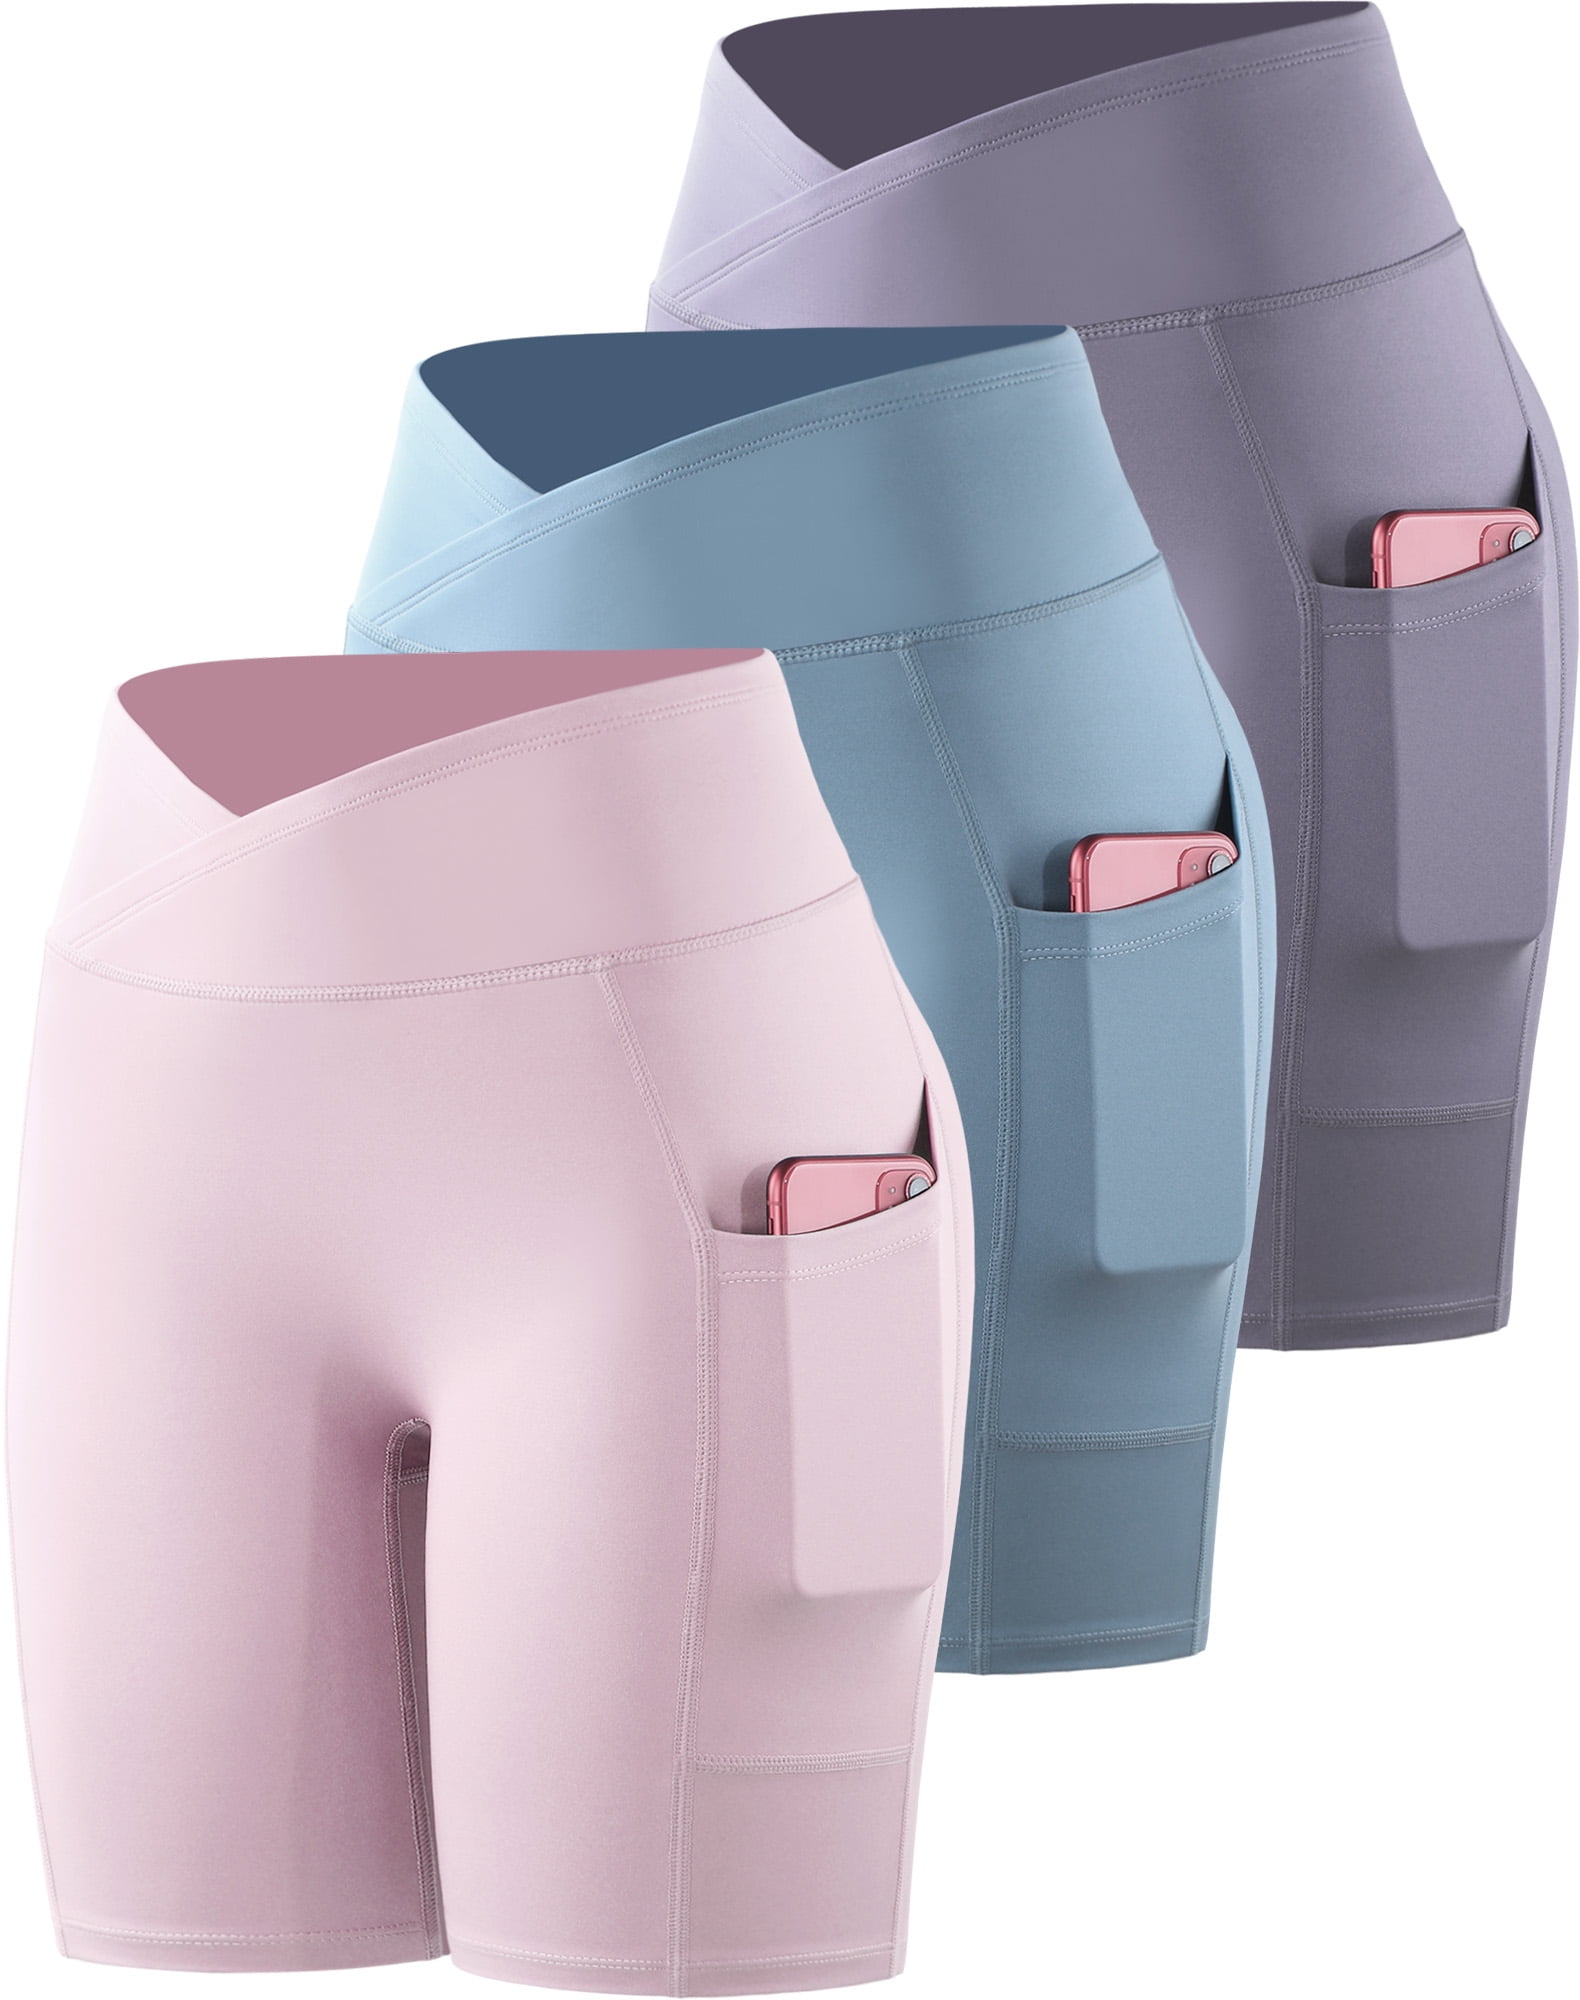 Mother's Day Gifts AXXD Ladies Shorts,High Waist Yoga Butt Lifting